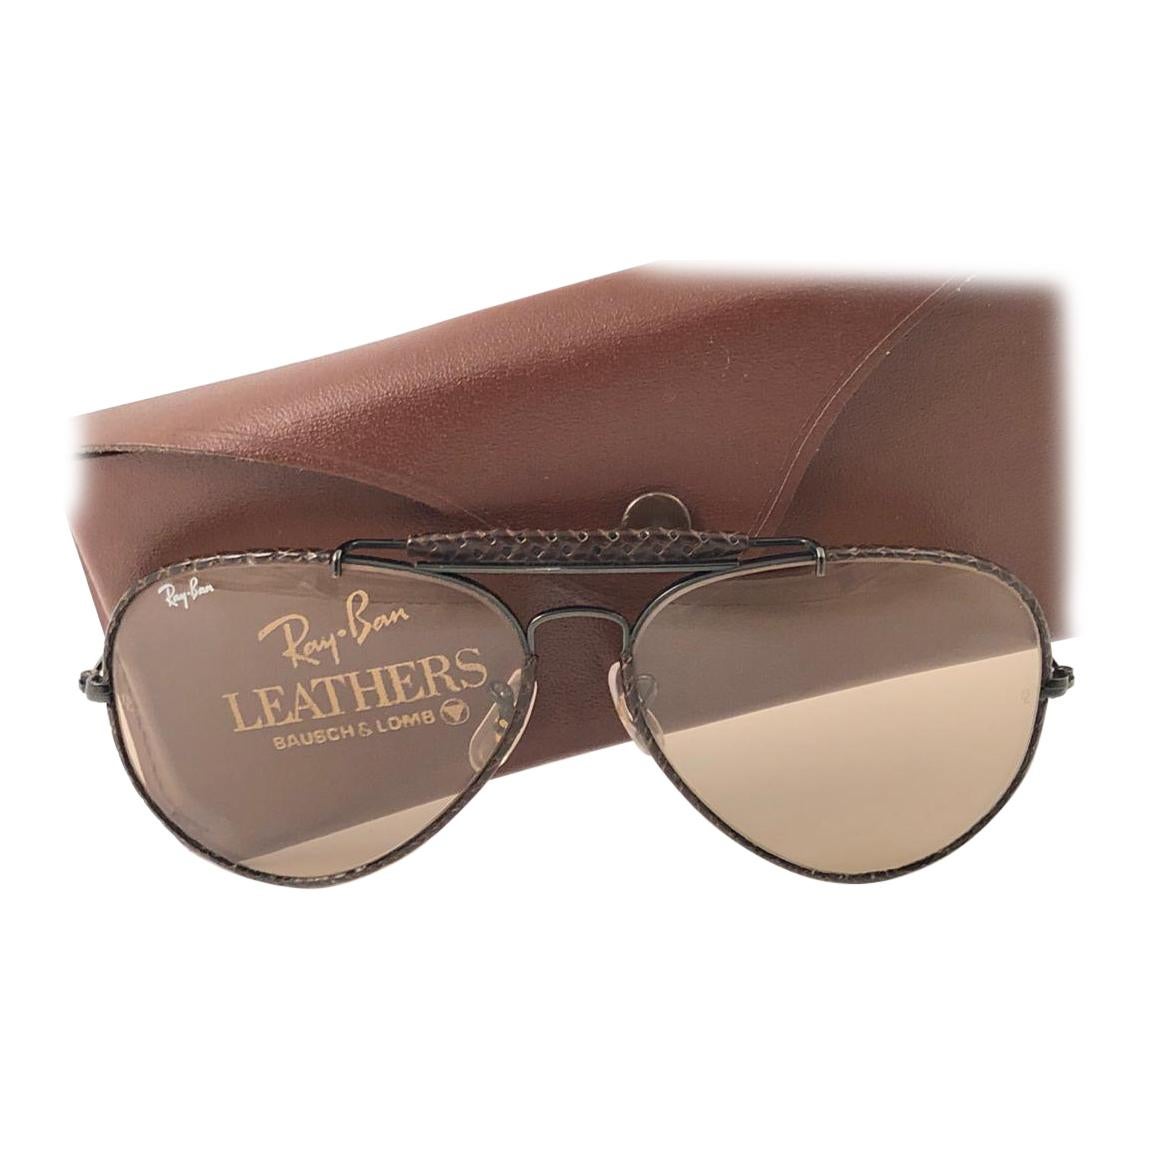 New Vintage Ray Ban Leathers Outdoorsman 62Mm Woven Changeable Sunglasses For Sale